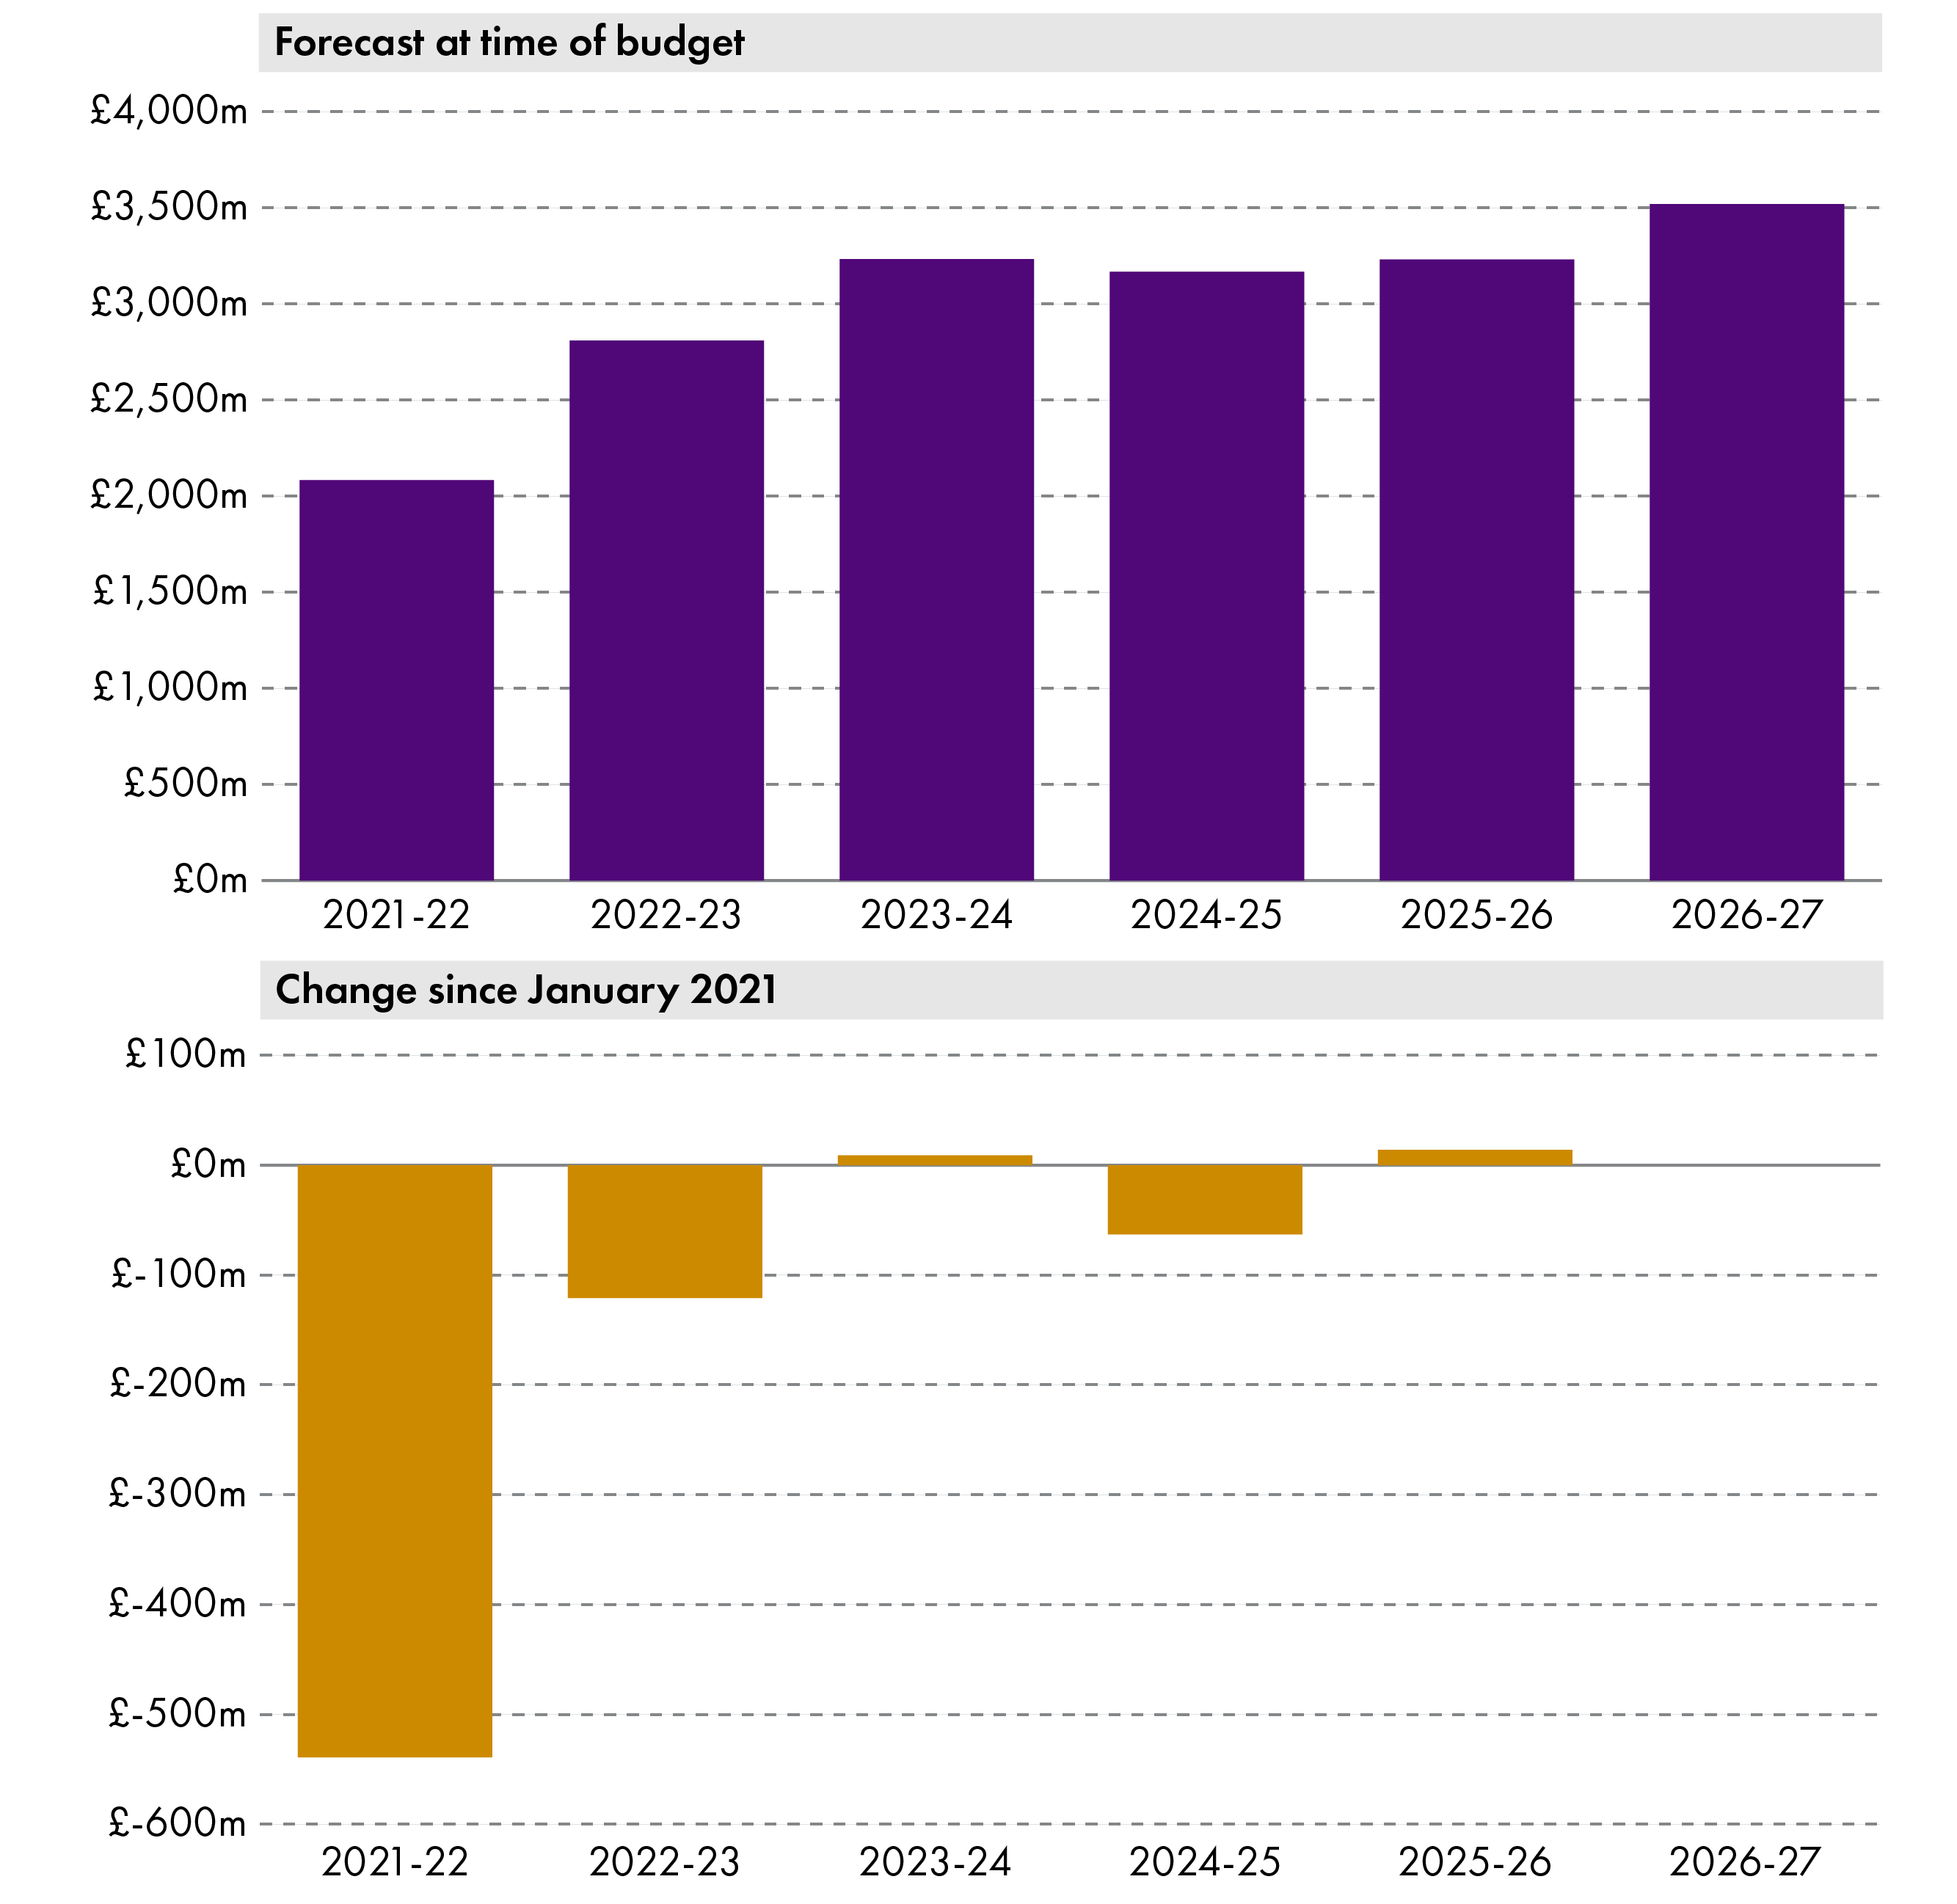 Figure 12 shows SFC forecast for NDR revenue. Forecast revenue from NDR is lower in 2021-22 (£539 million) and 2022-23 (£121 million) than expected at the time of the January 2021 forecast.